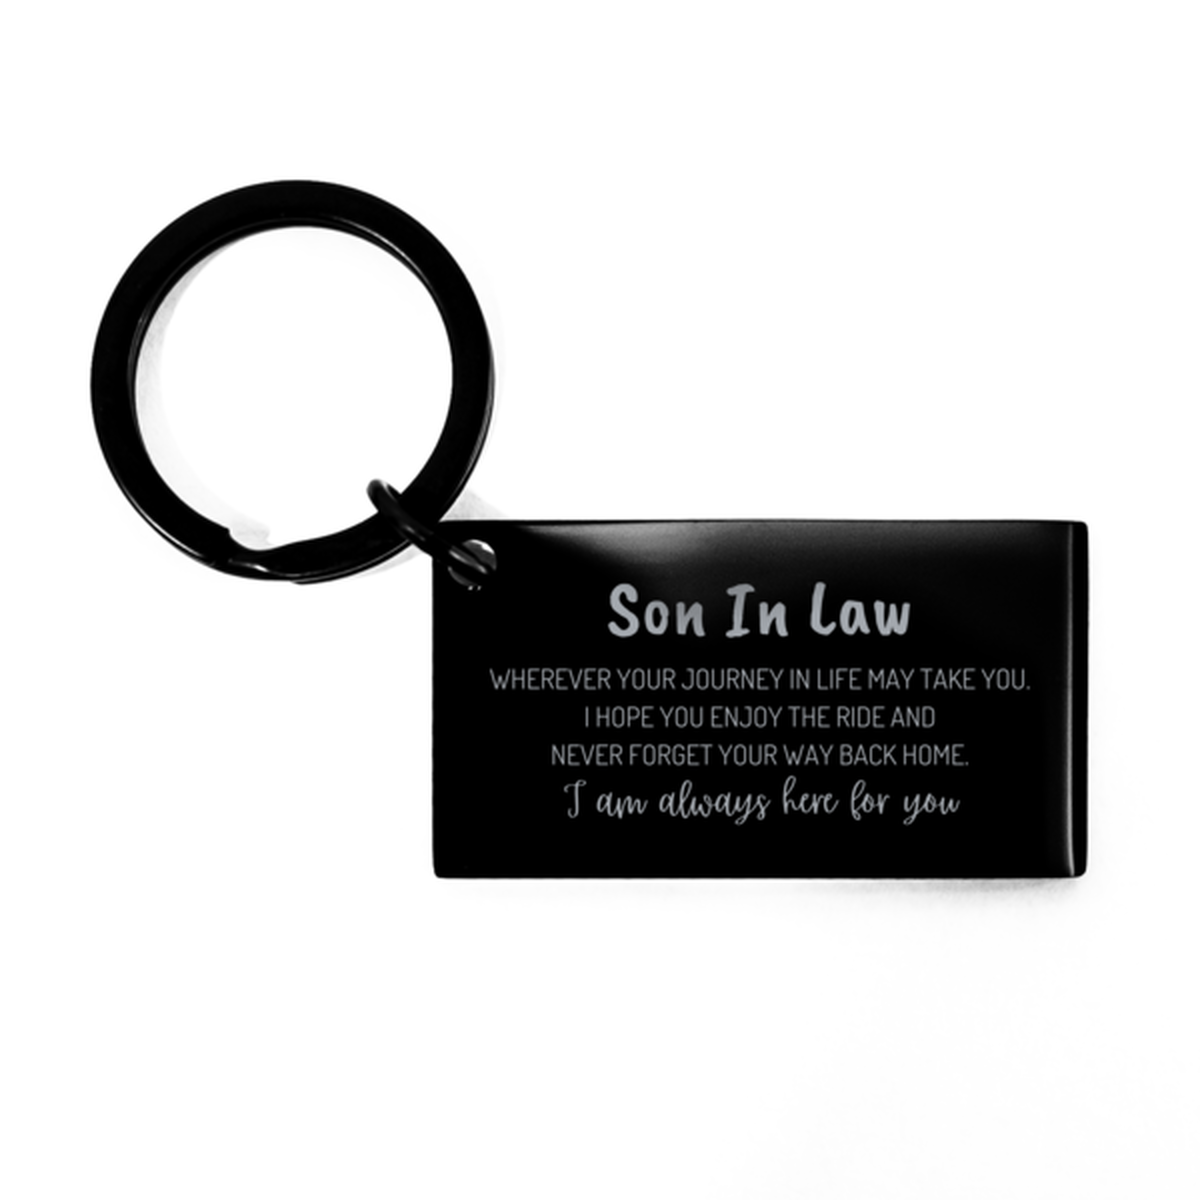 Son In Law wherever your journey in life may take you, I am always here for you Son In Law Keychain, Awesome Christmas Gifts For Son In Law, Son In Law Birthday Gifts for Men Women Family Loved One